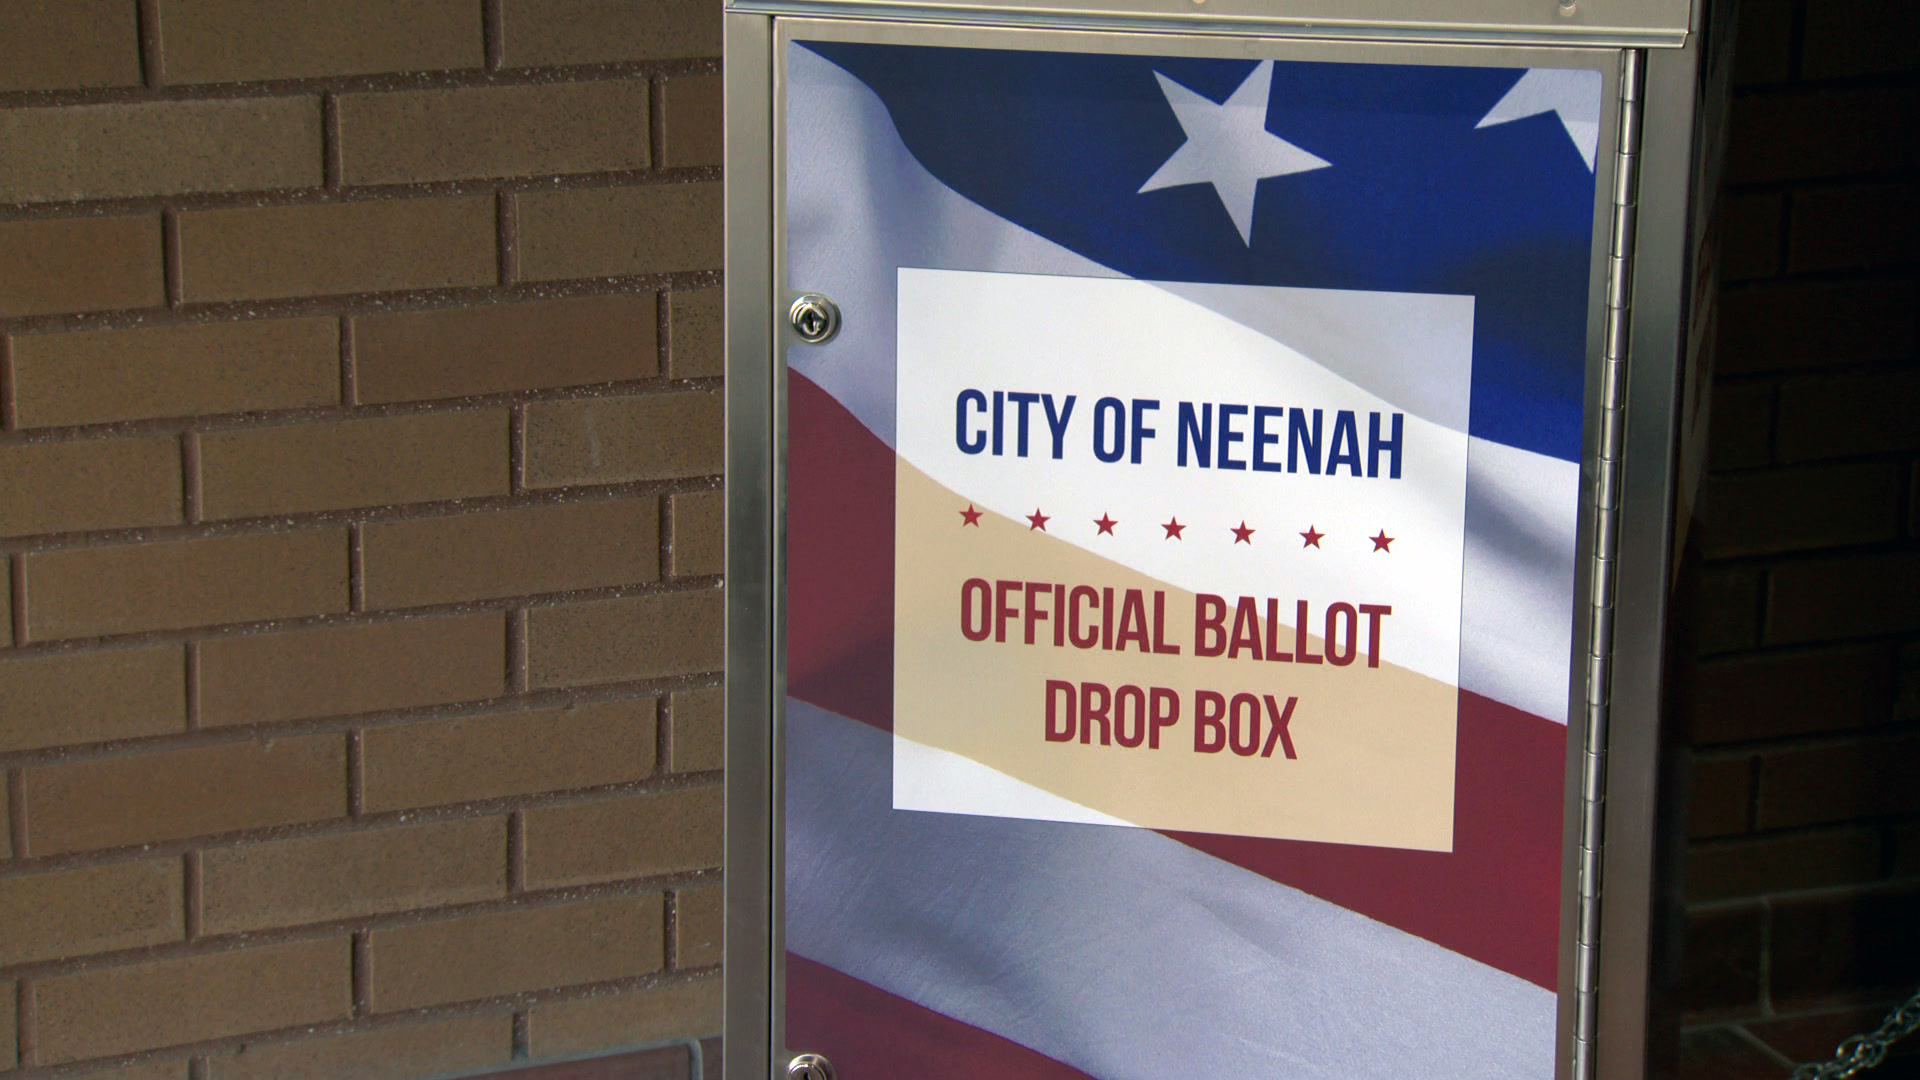 A metal box with a graphic of the U.S. flag with a sign reading "City of Neenah" and "Official Ballot Drop Box" on its front stands in front of a brick wall.